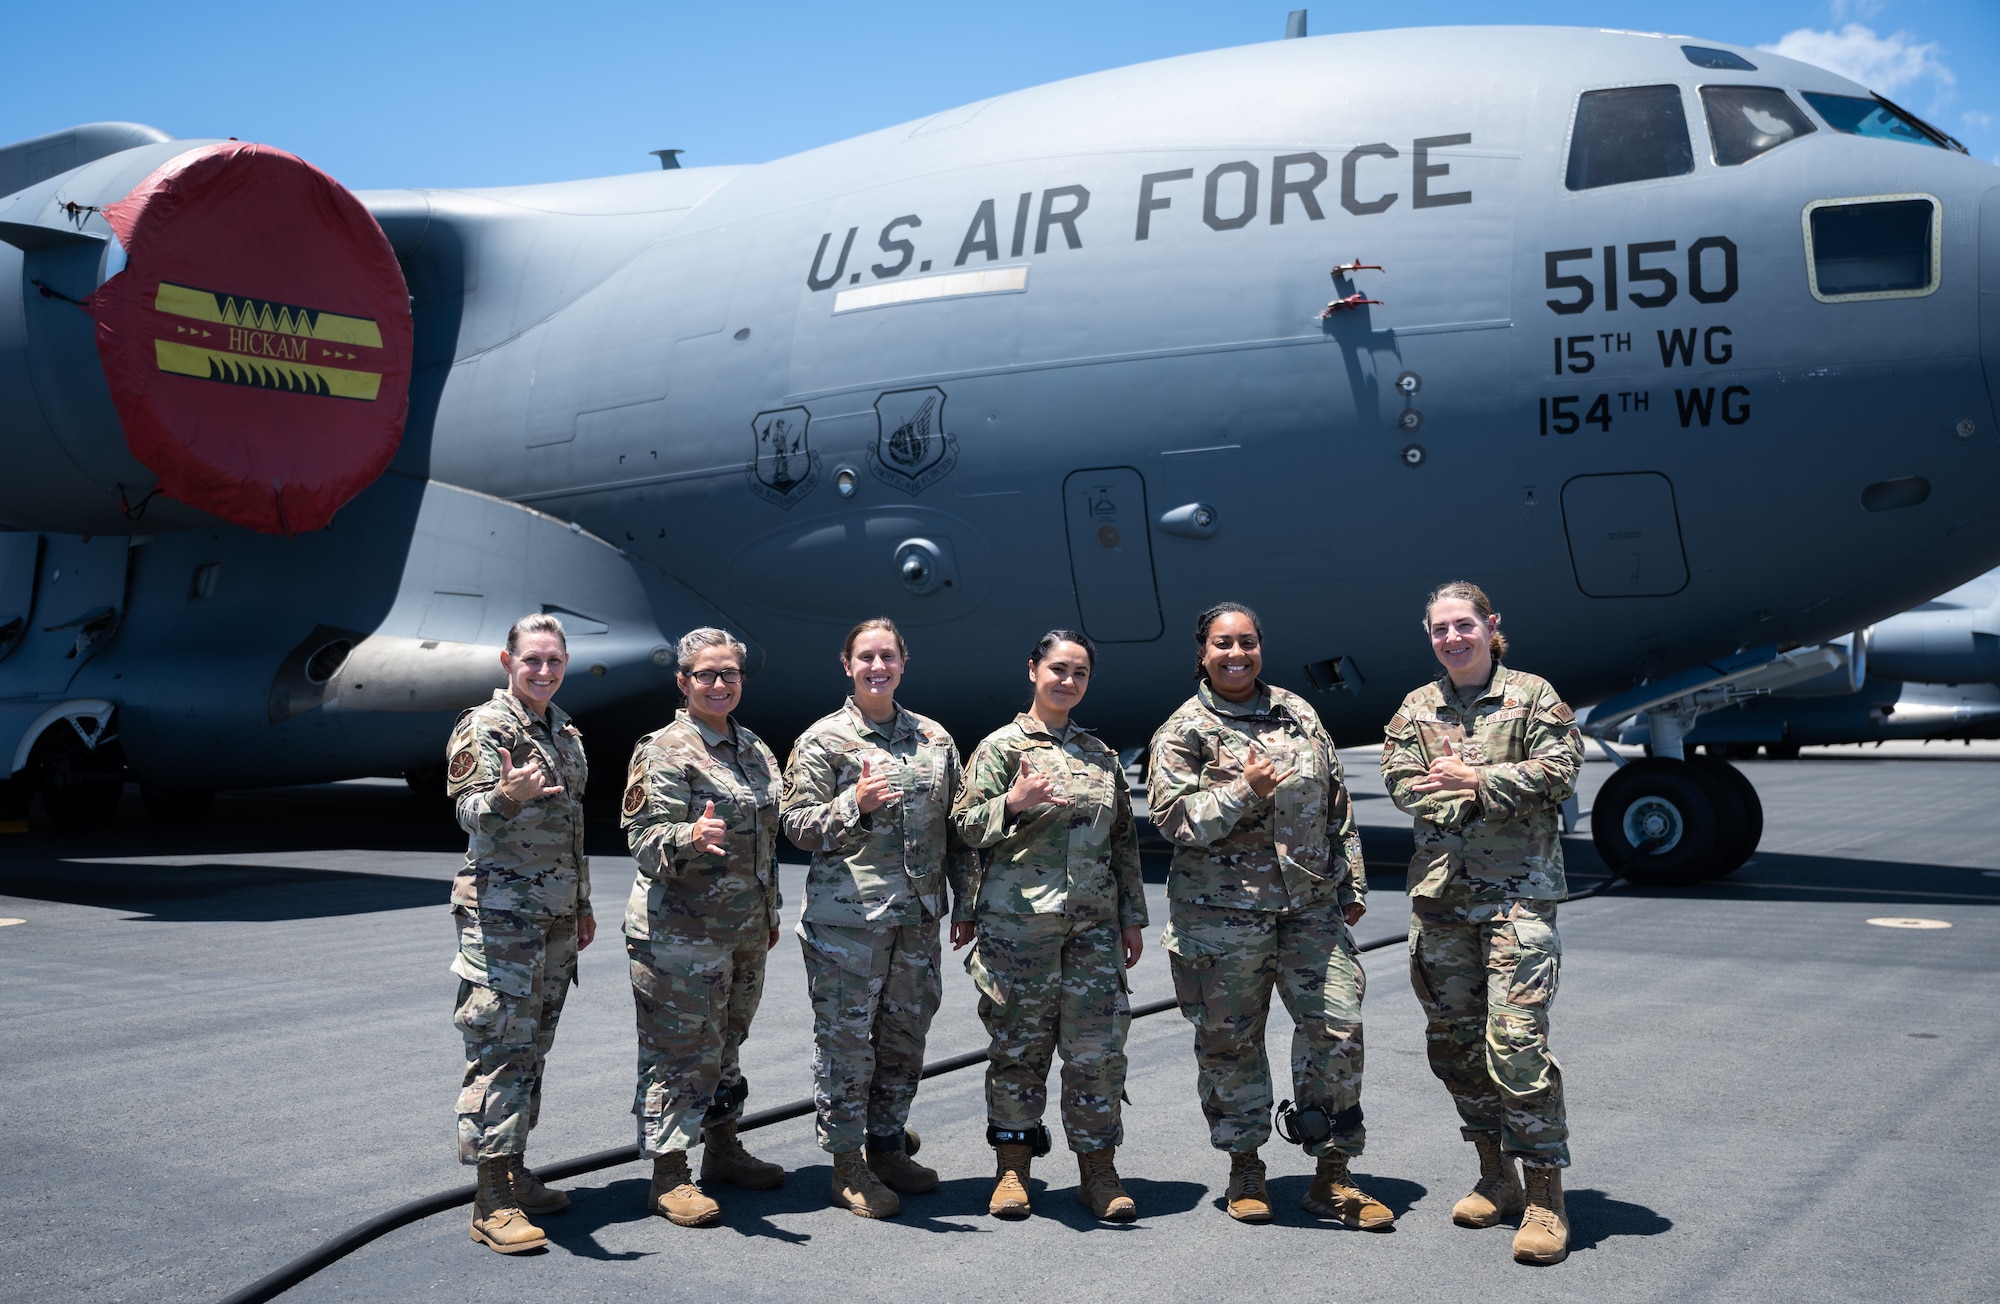 Leadership from the 15th Maintenance Squadron, 15th Aircraft Maintenance Squadron and 15th Maintenance Operations pose for a photo in front of a C-17 Globemaster III at Joint Base Pearl Harbor-Hickam, Hawaii, Aug. 24, 2022. The leadership pictured consists of three directors of operations and three production superintendents. (U.S. Air Force photo by Staff Sgt. Alan Ricker)